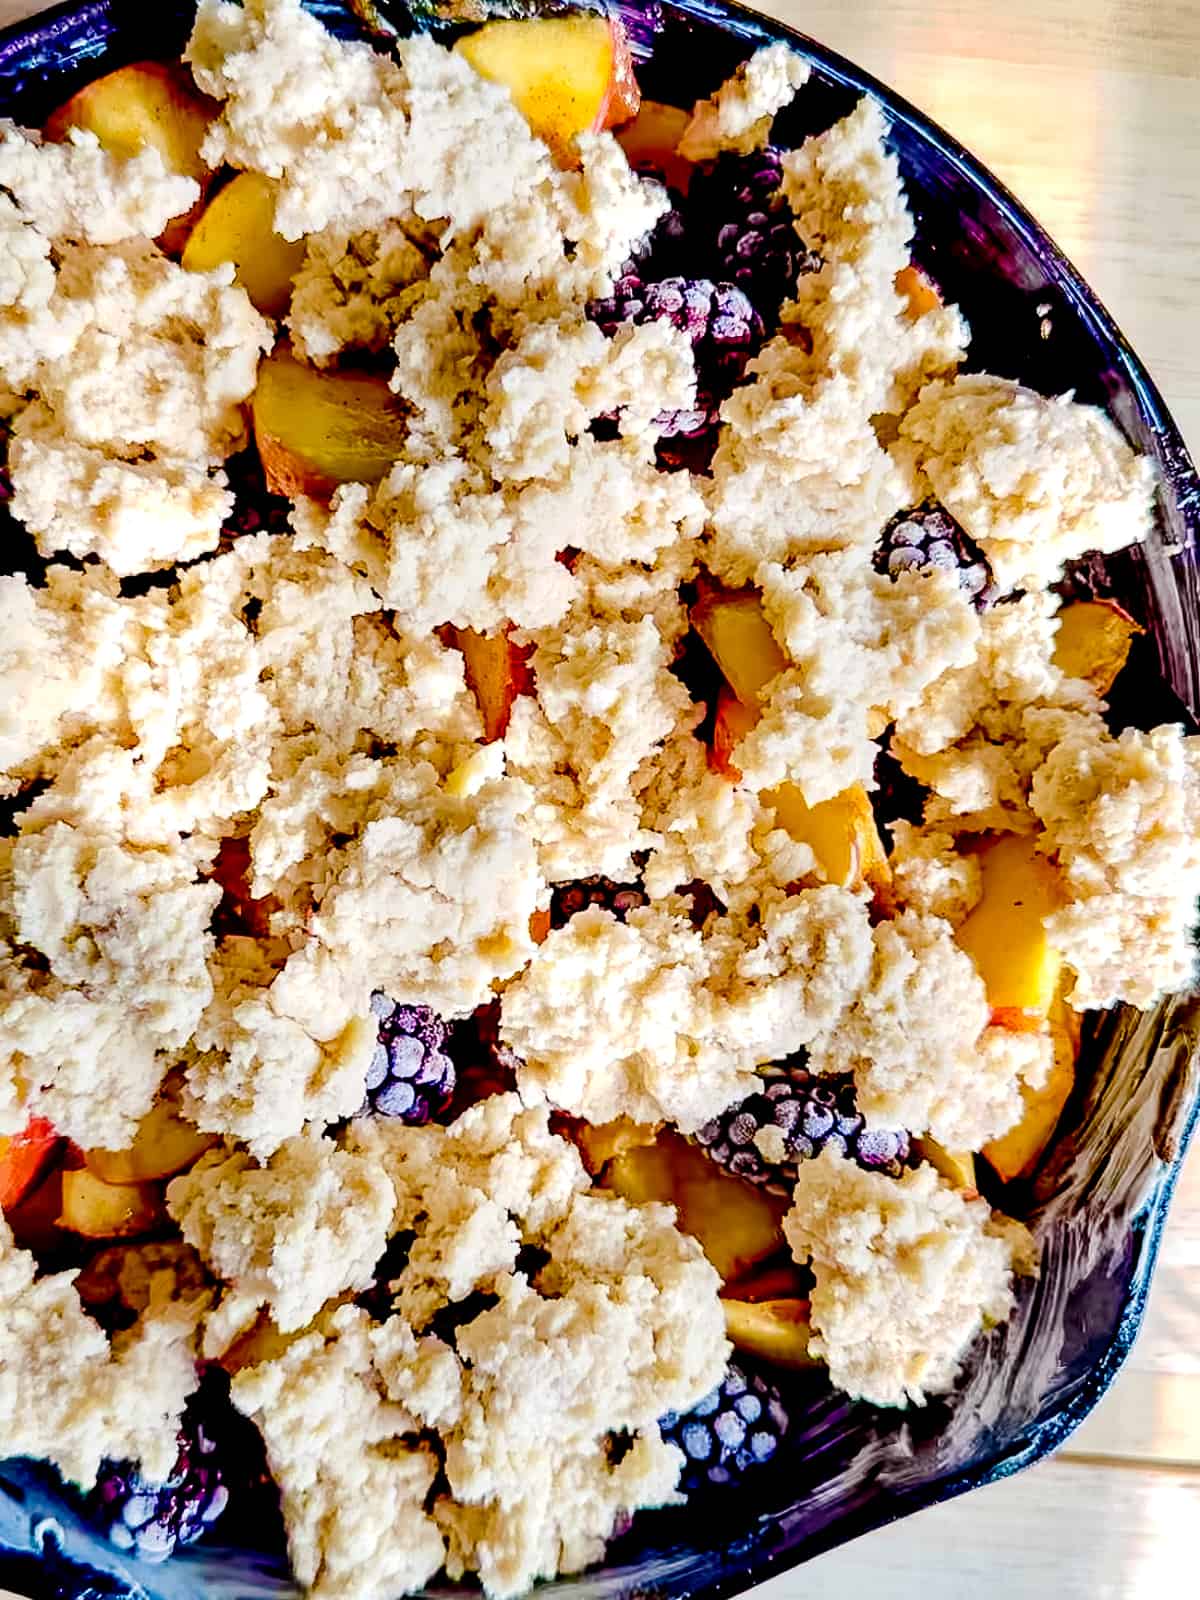 Biscuit topping completely covering blackberry peach cobbler filling.